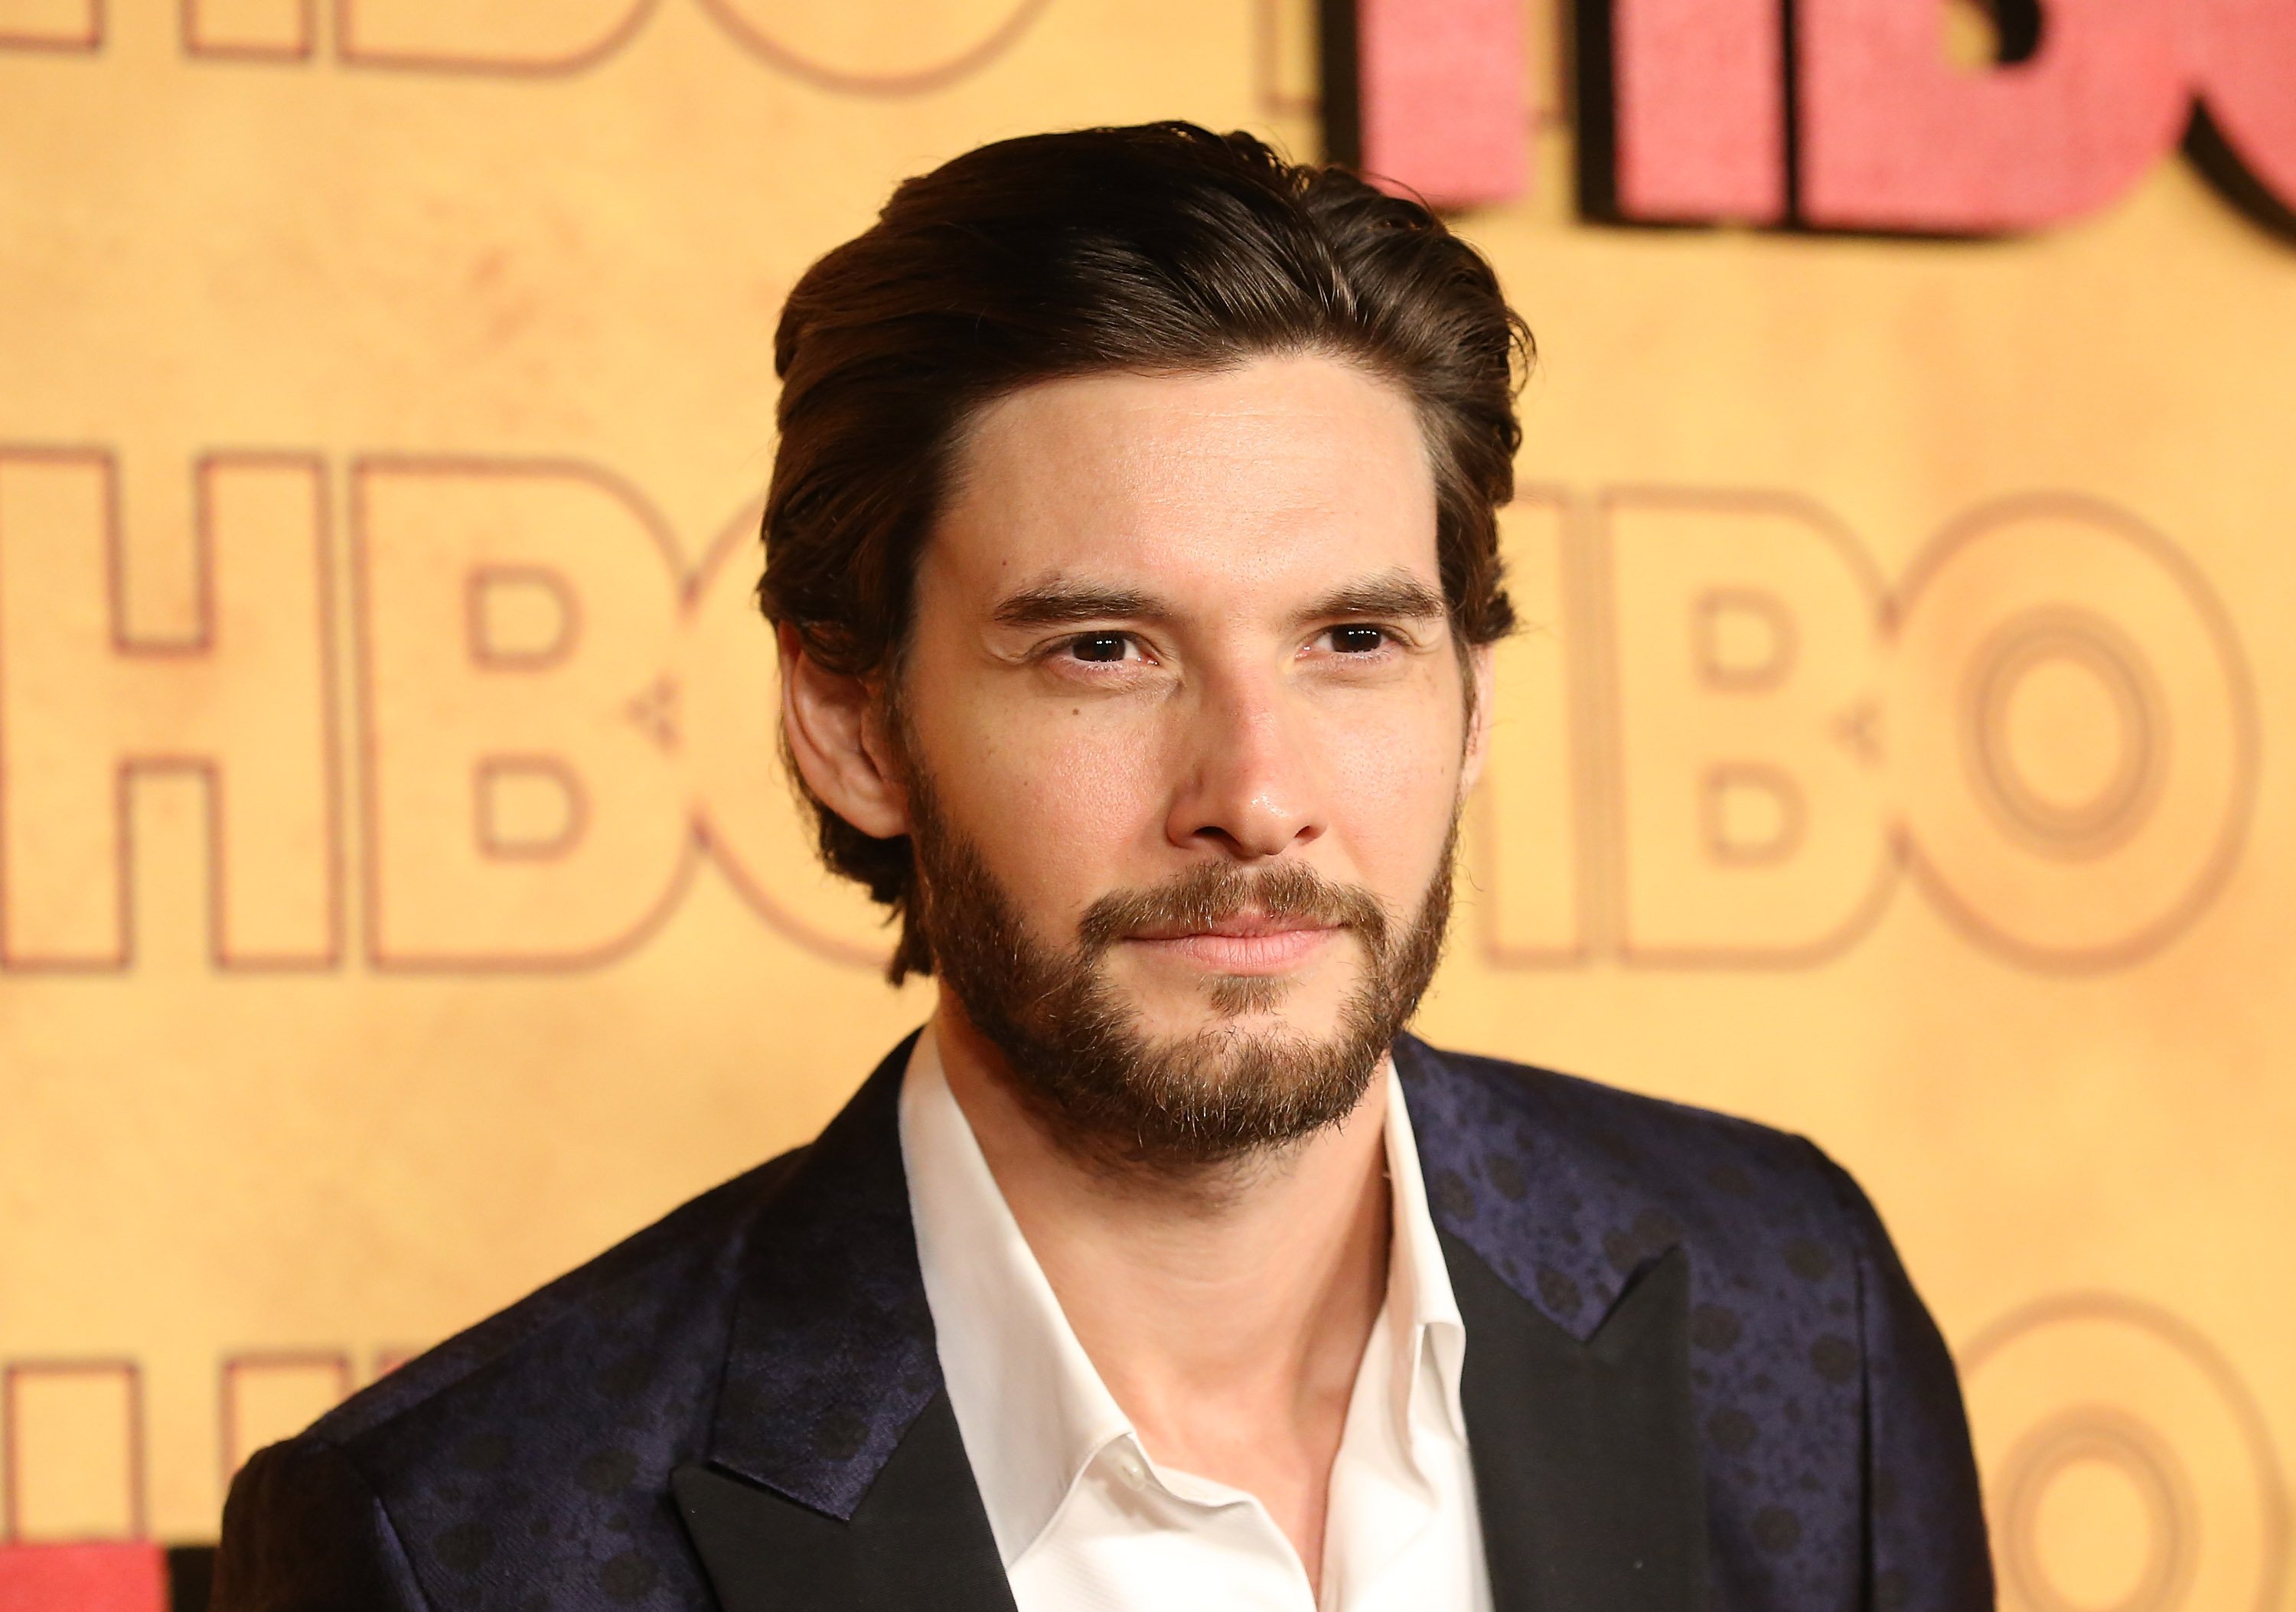 Actor Ben Barnes stands in front of a gold background with the HBO logo